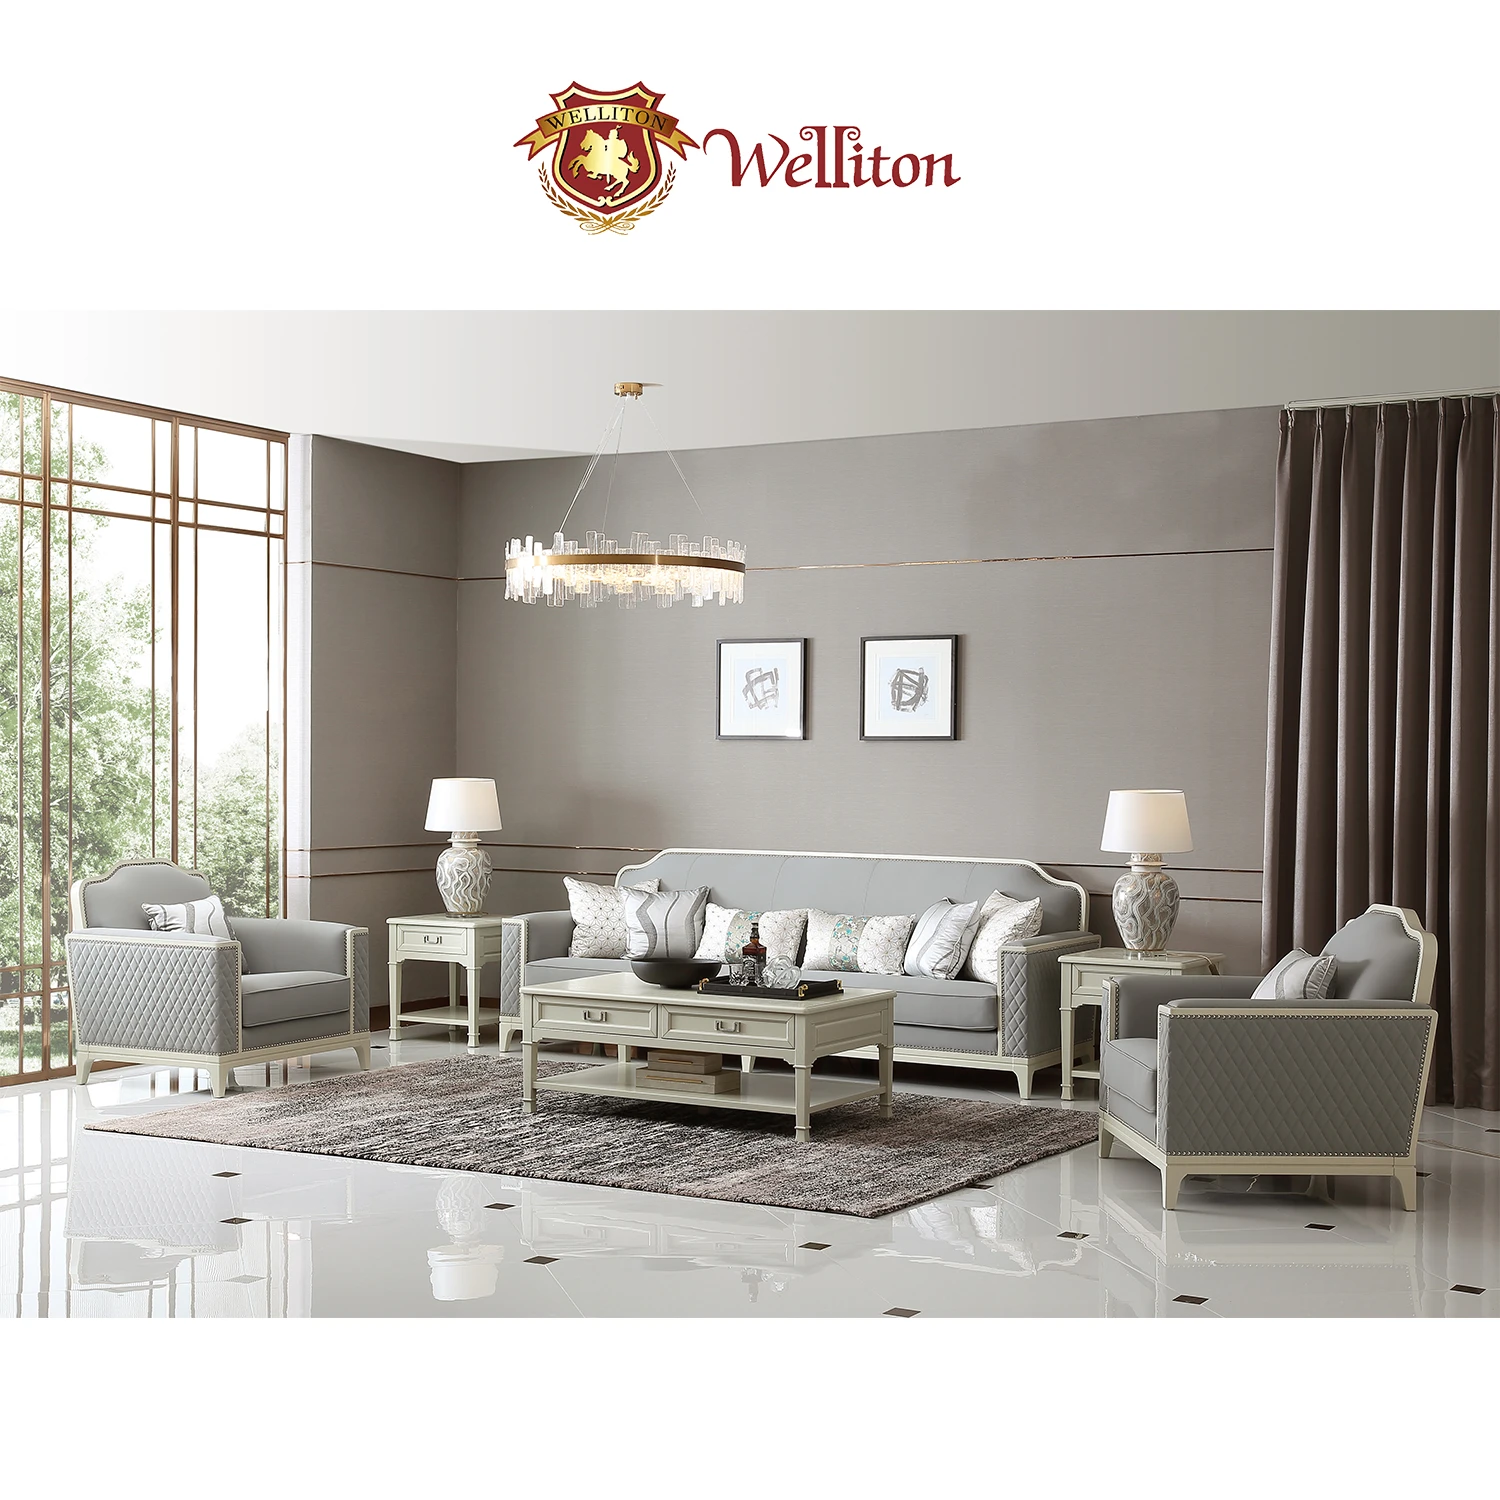 Welliton OEM&ODM  Leather Sofa Sets Sectional Sofa Design Furniture Living Room Modern Therr-seat Small Aparment X608-17 Luxury